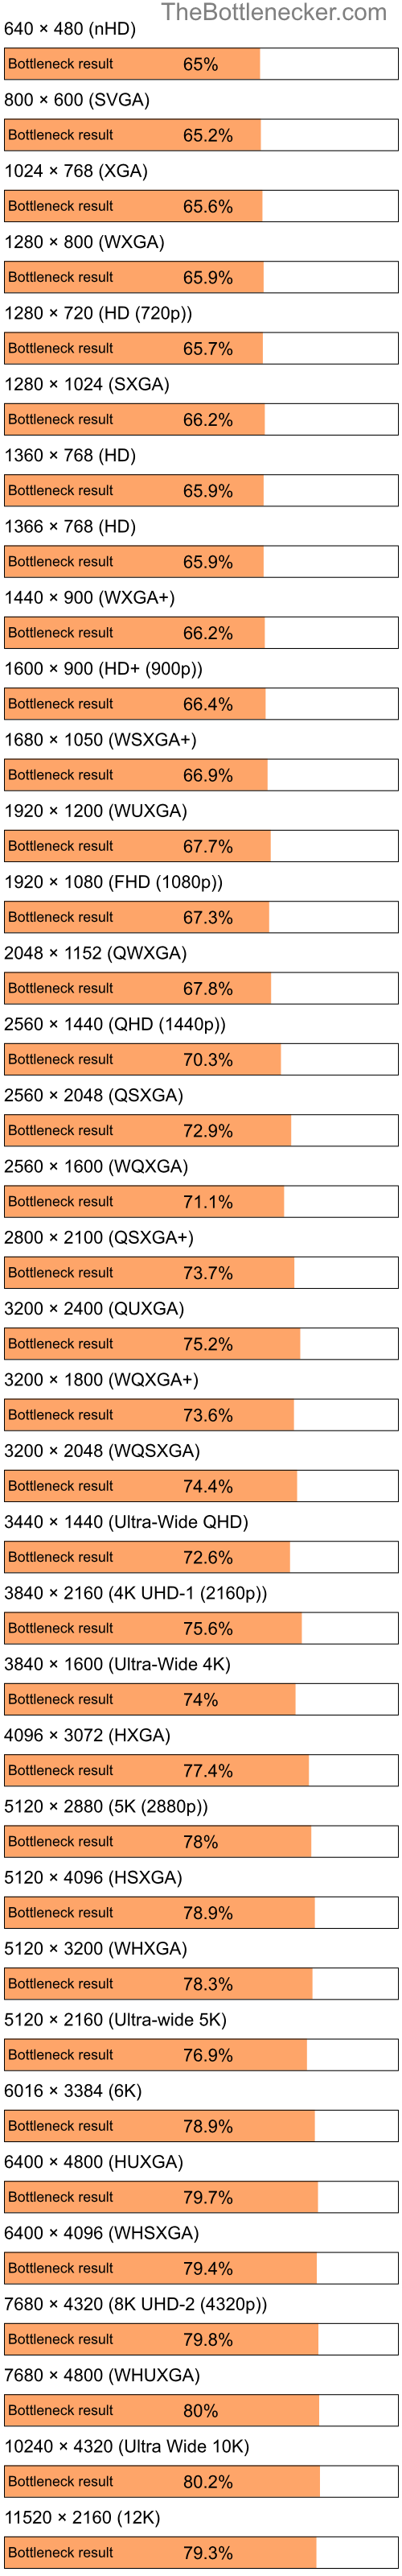 Bottleneck results by resolution for Intel Celeron and AMD Mobility Radeon HD 2300 in Processor Intense Tasks